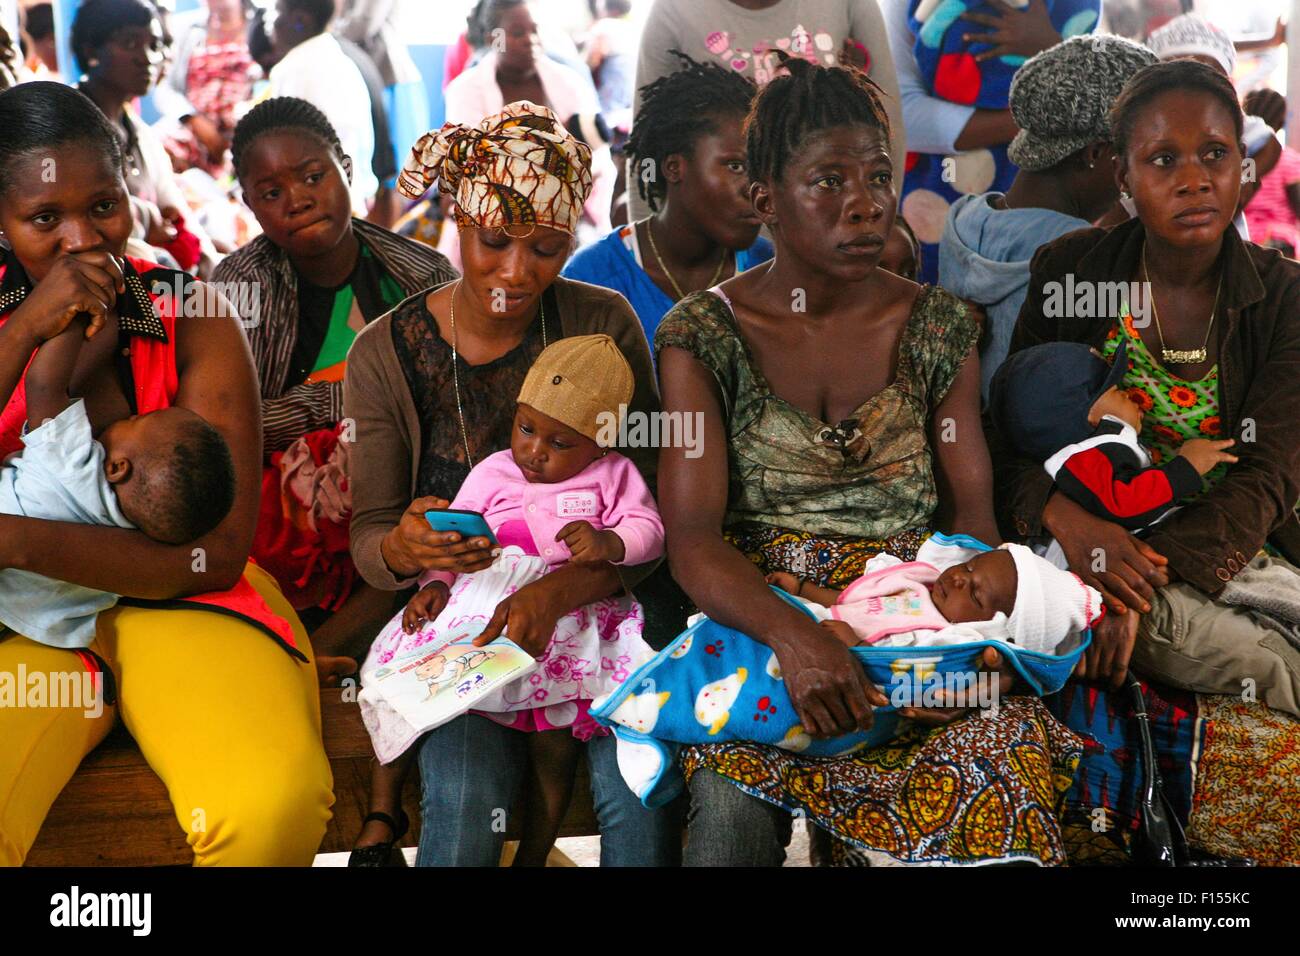 Liberian women wait with their children at a health clinic for a health check during the Ebola outbreak February 6, 2015 in Monrovia, Liberia. Stock Photo